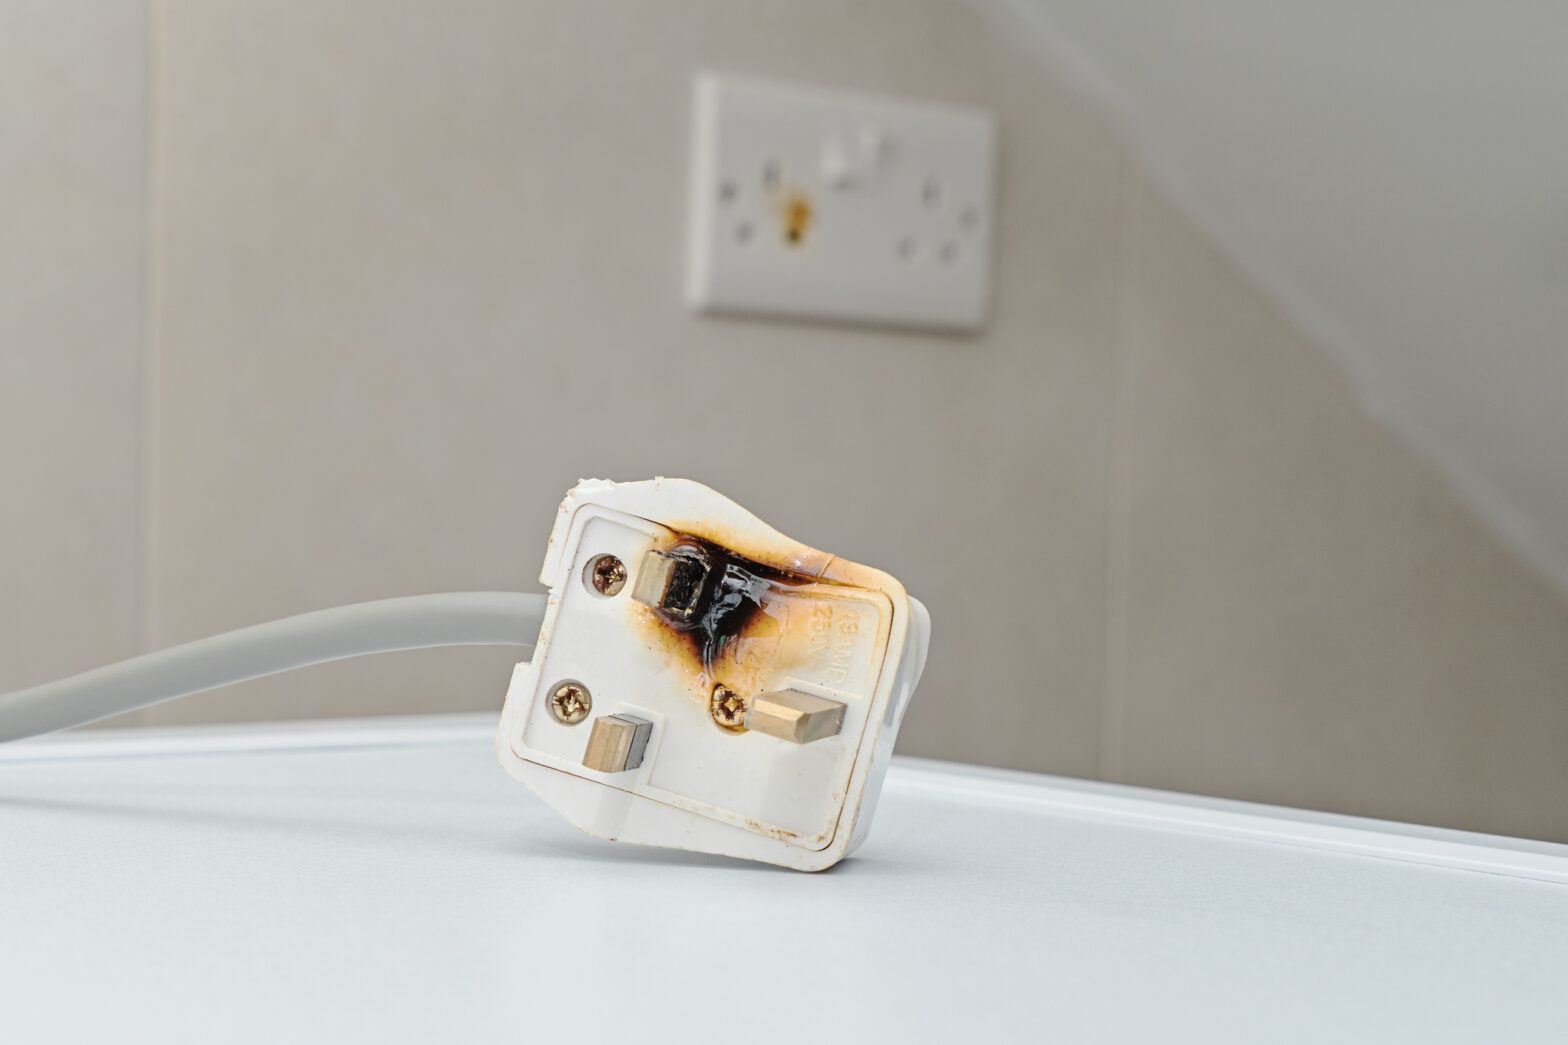 You can call a product liability lawyer for a defective electrical cord